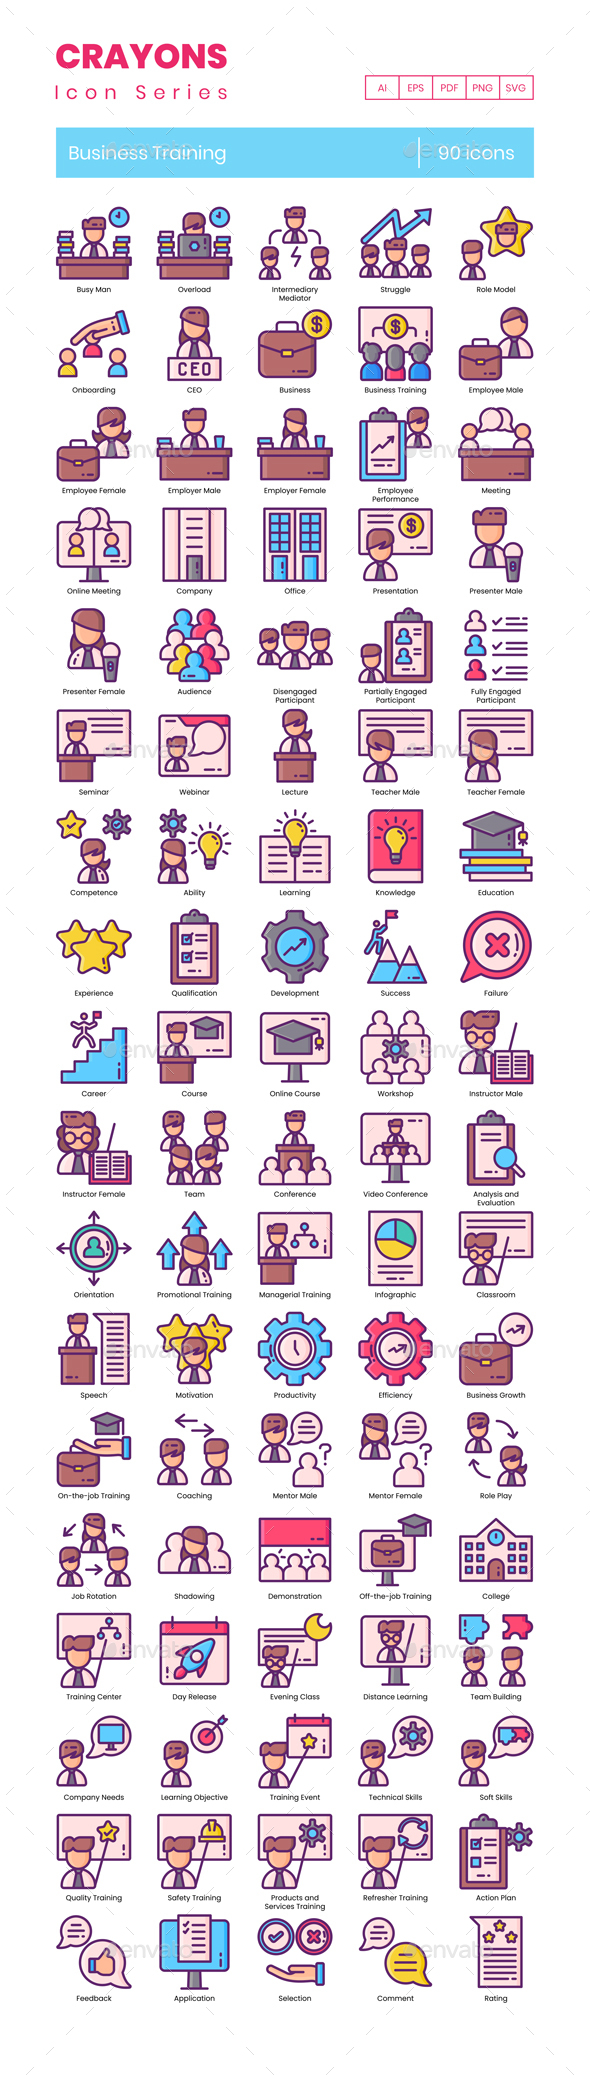 90 Business Training Icons | Crayons Series